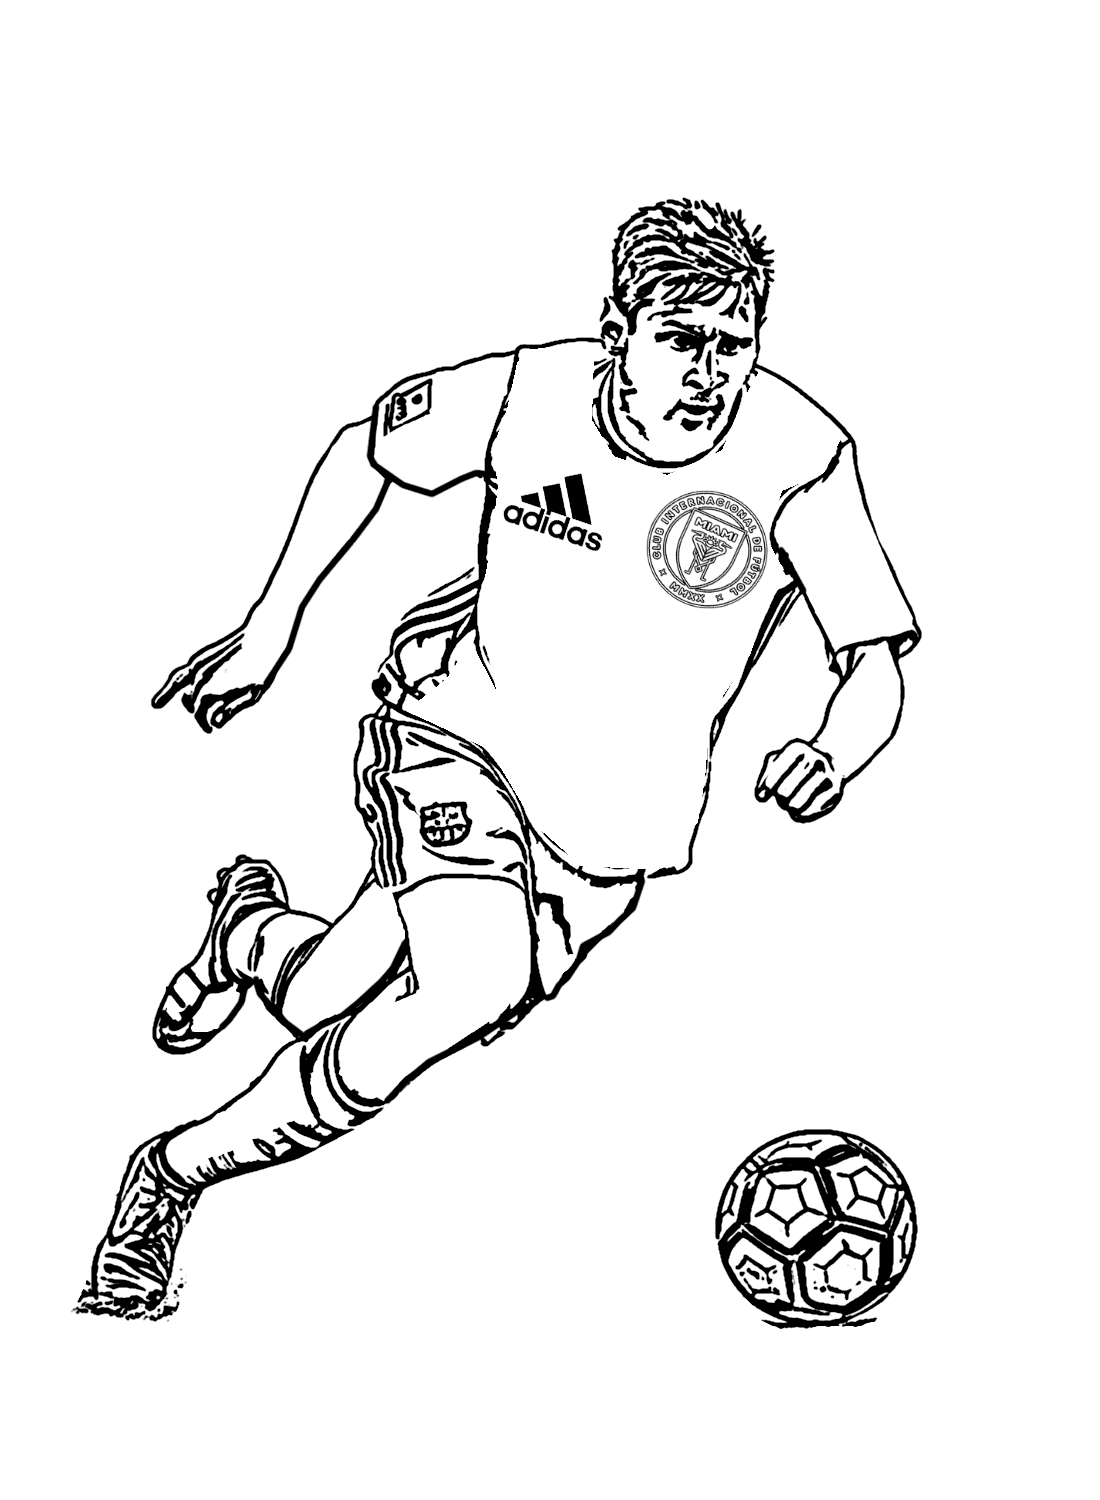 Lionel Messi Best Coloring Pages from Lionel Messi